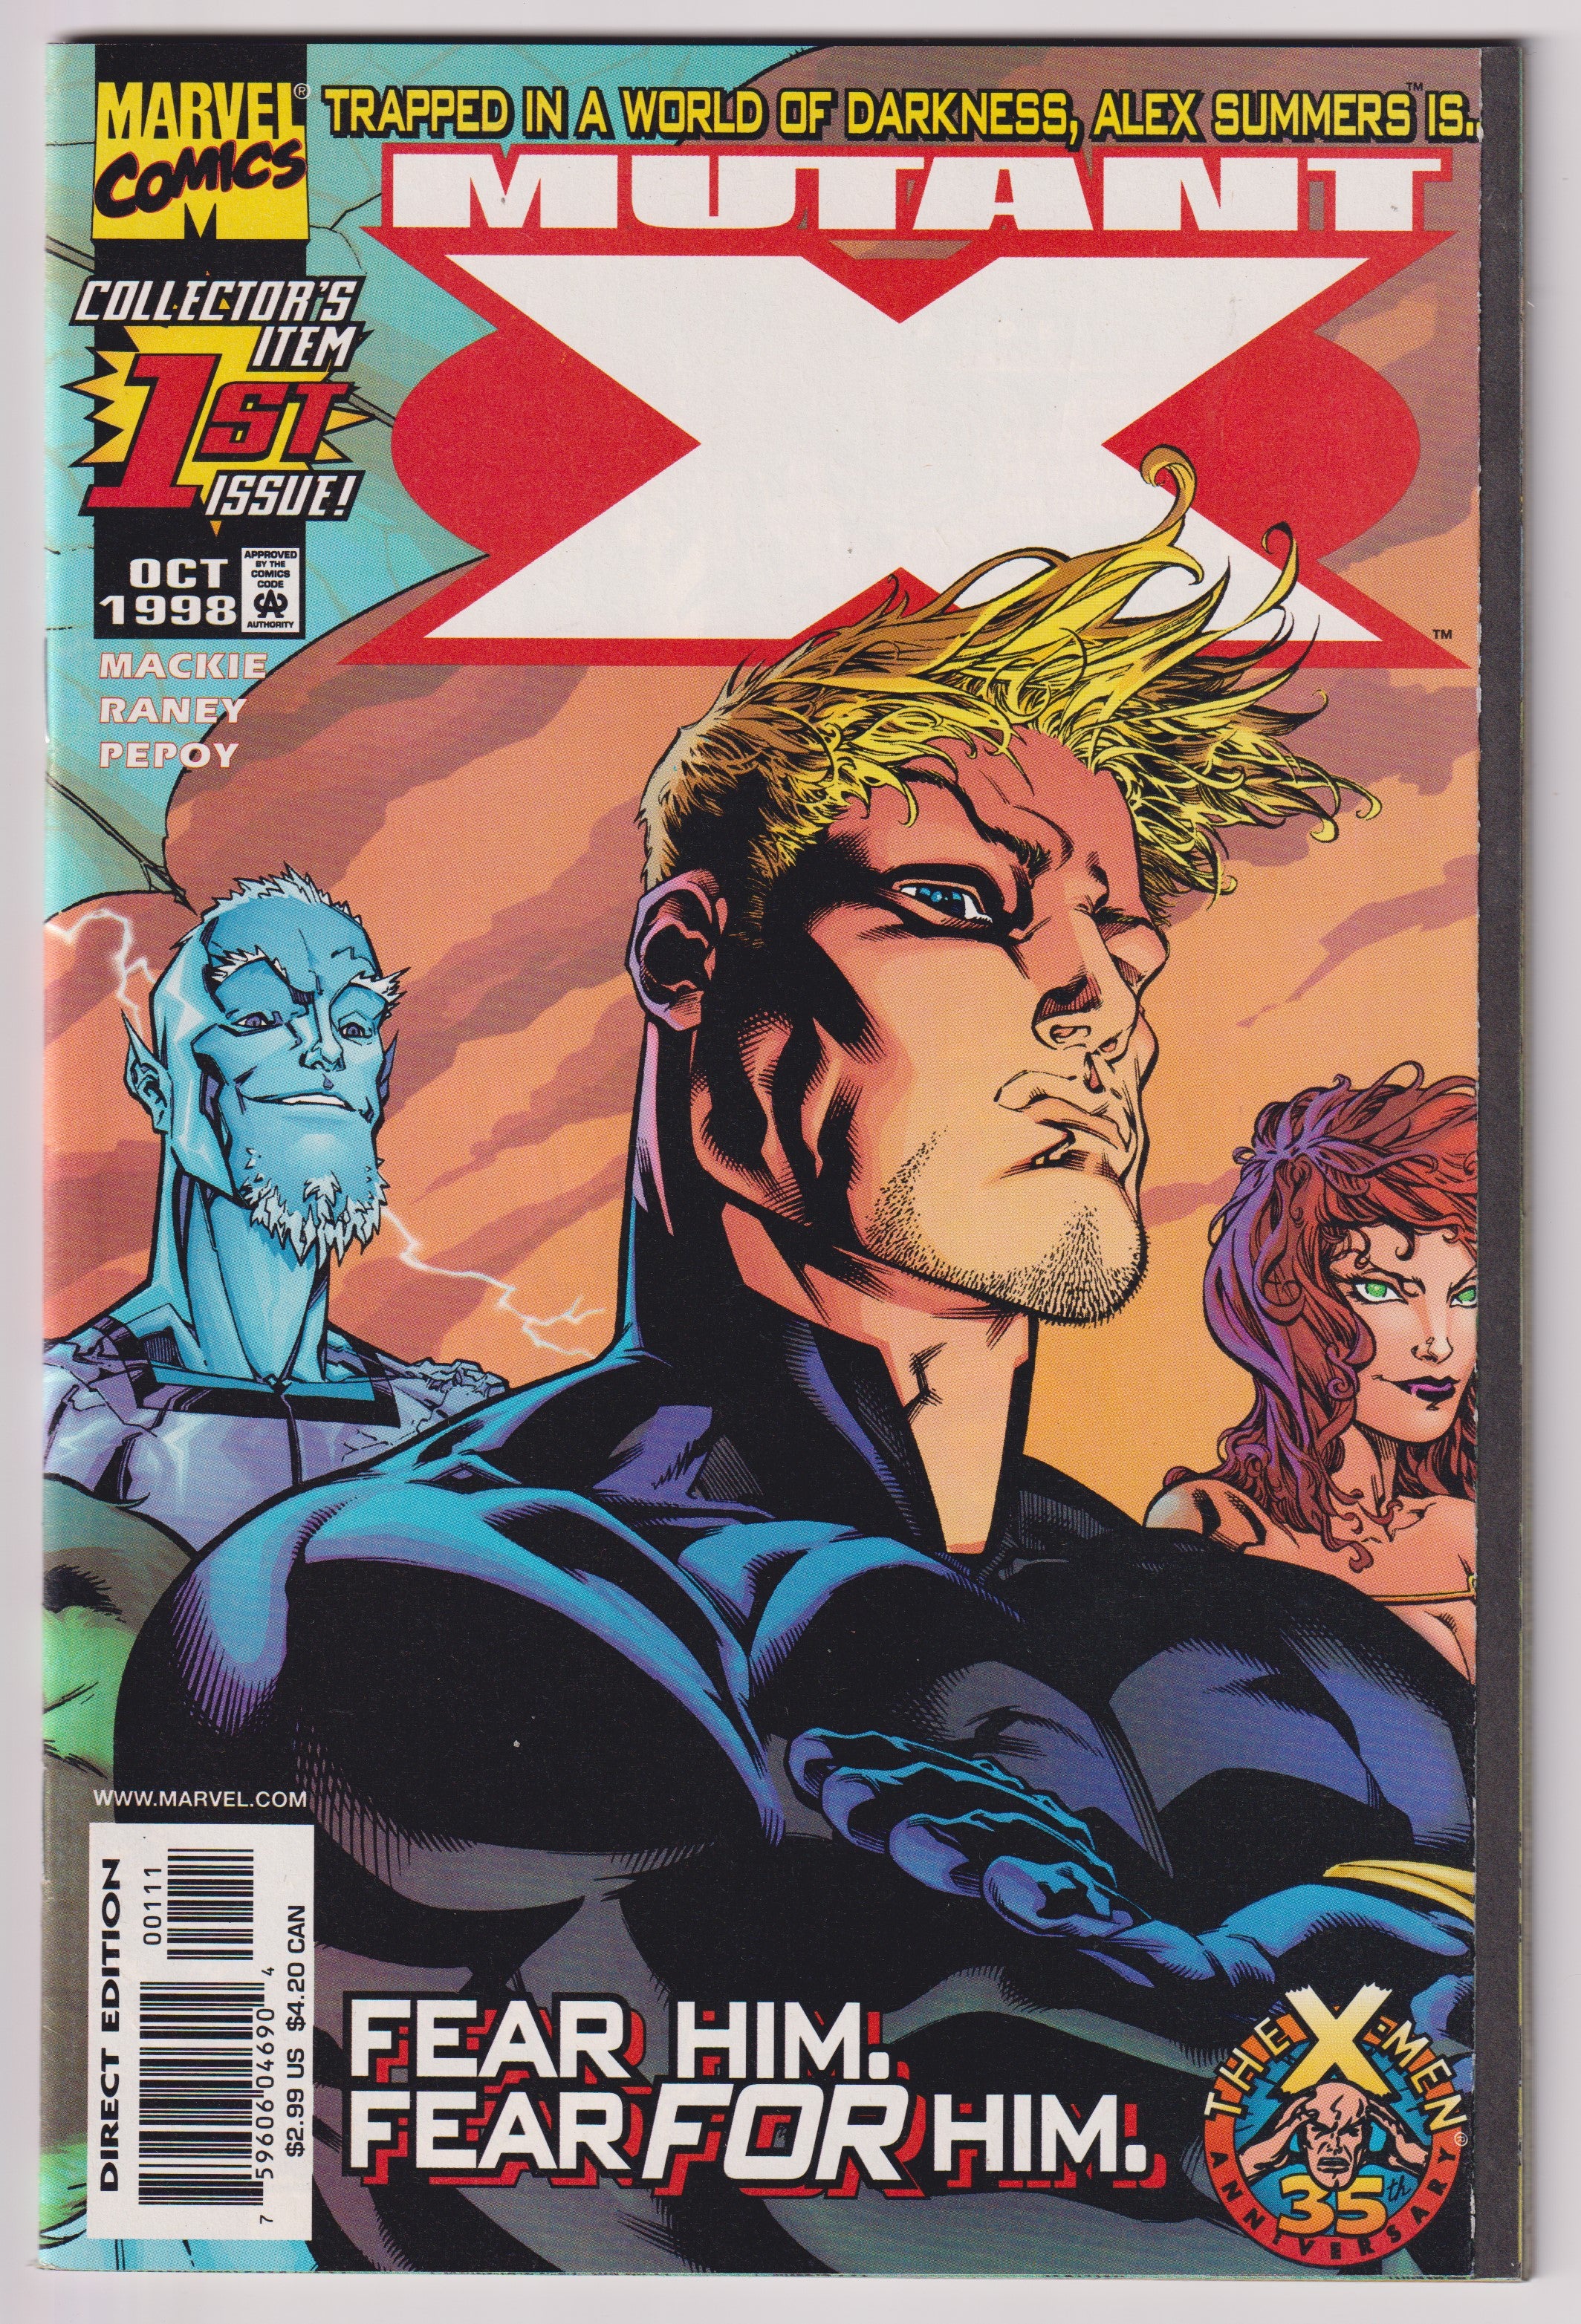 Photo of Mutant X (1998)  Iss 1A Near Mint  Comic sold by Stronghold Collectibles